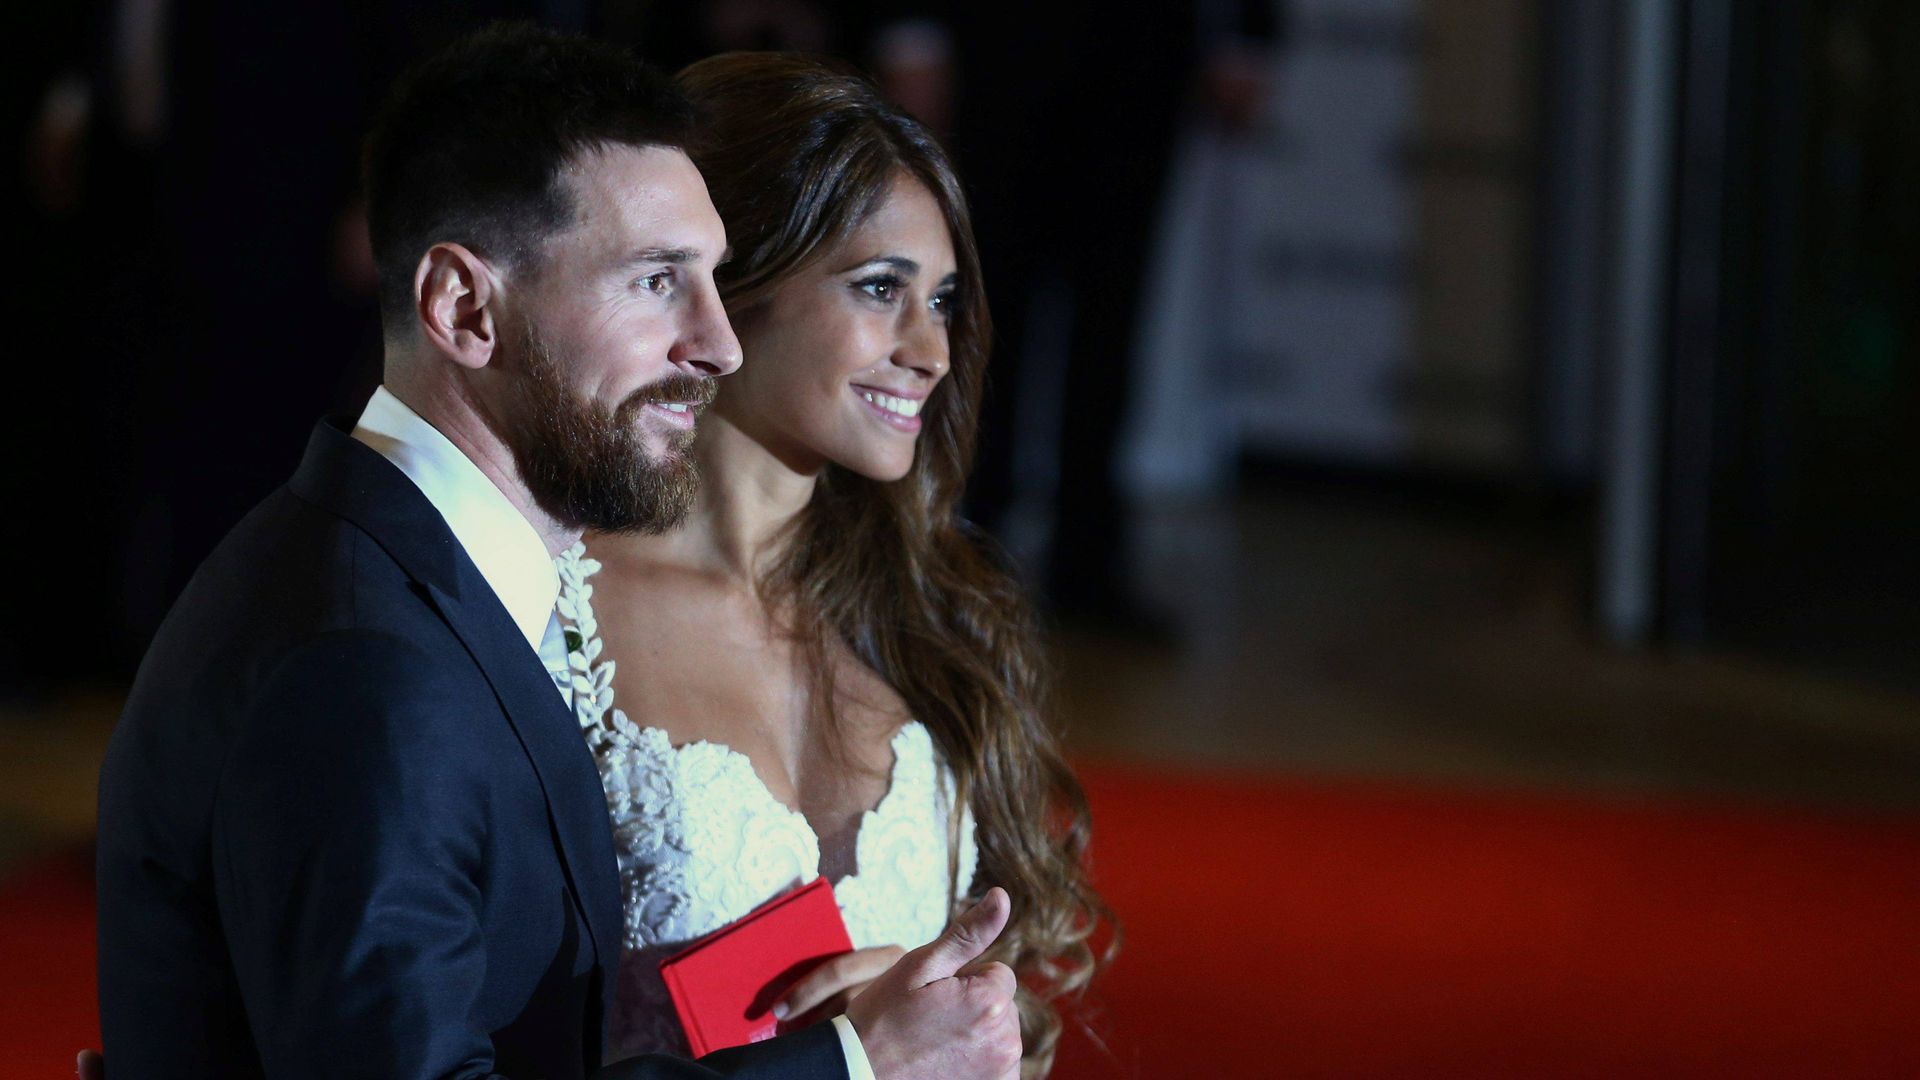 The Wedding of Messi and Roccuzzo